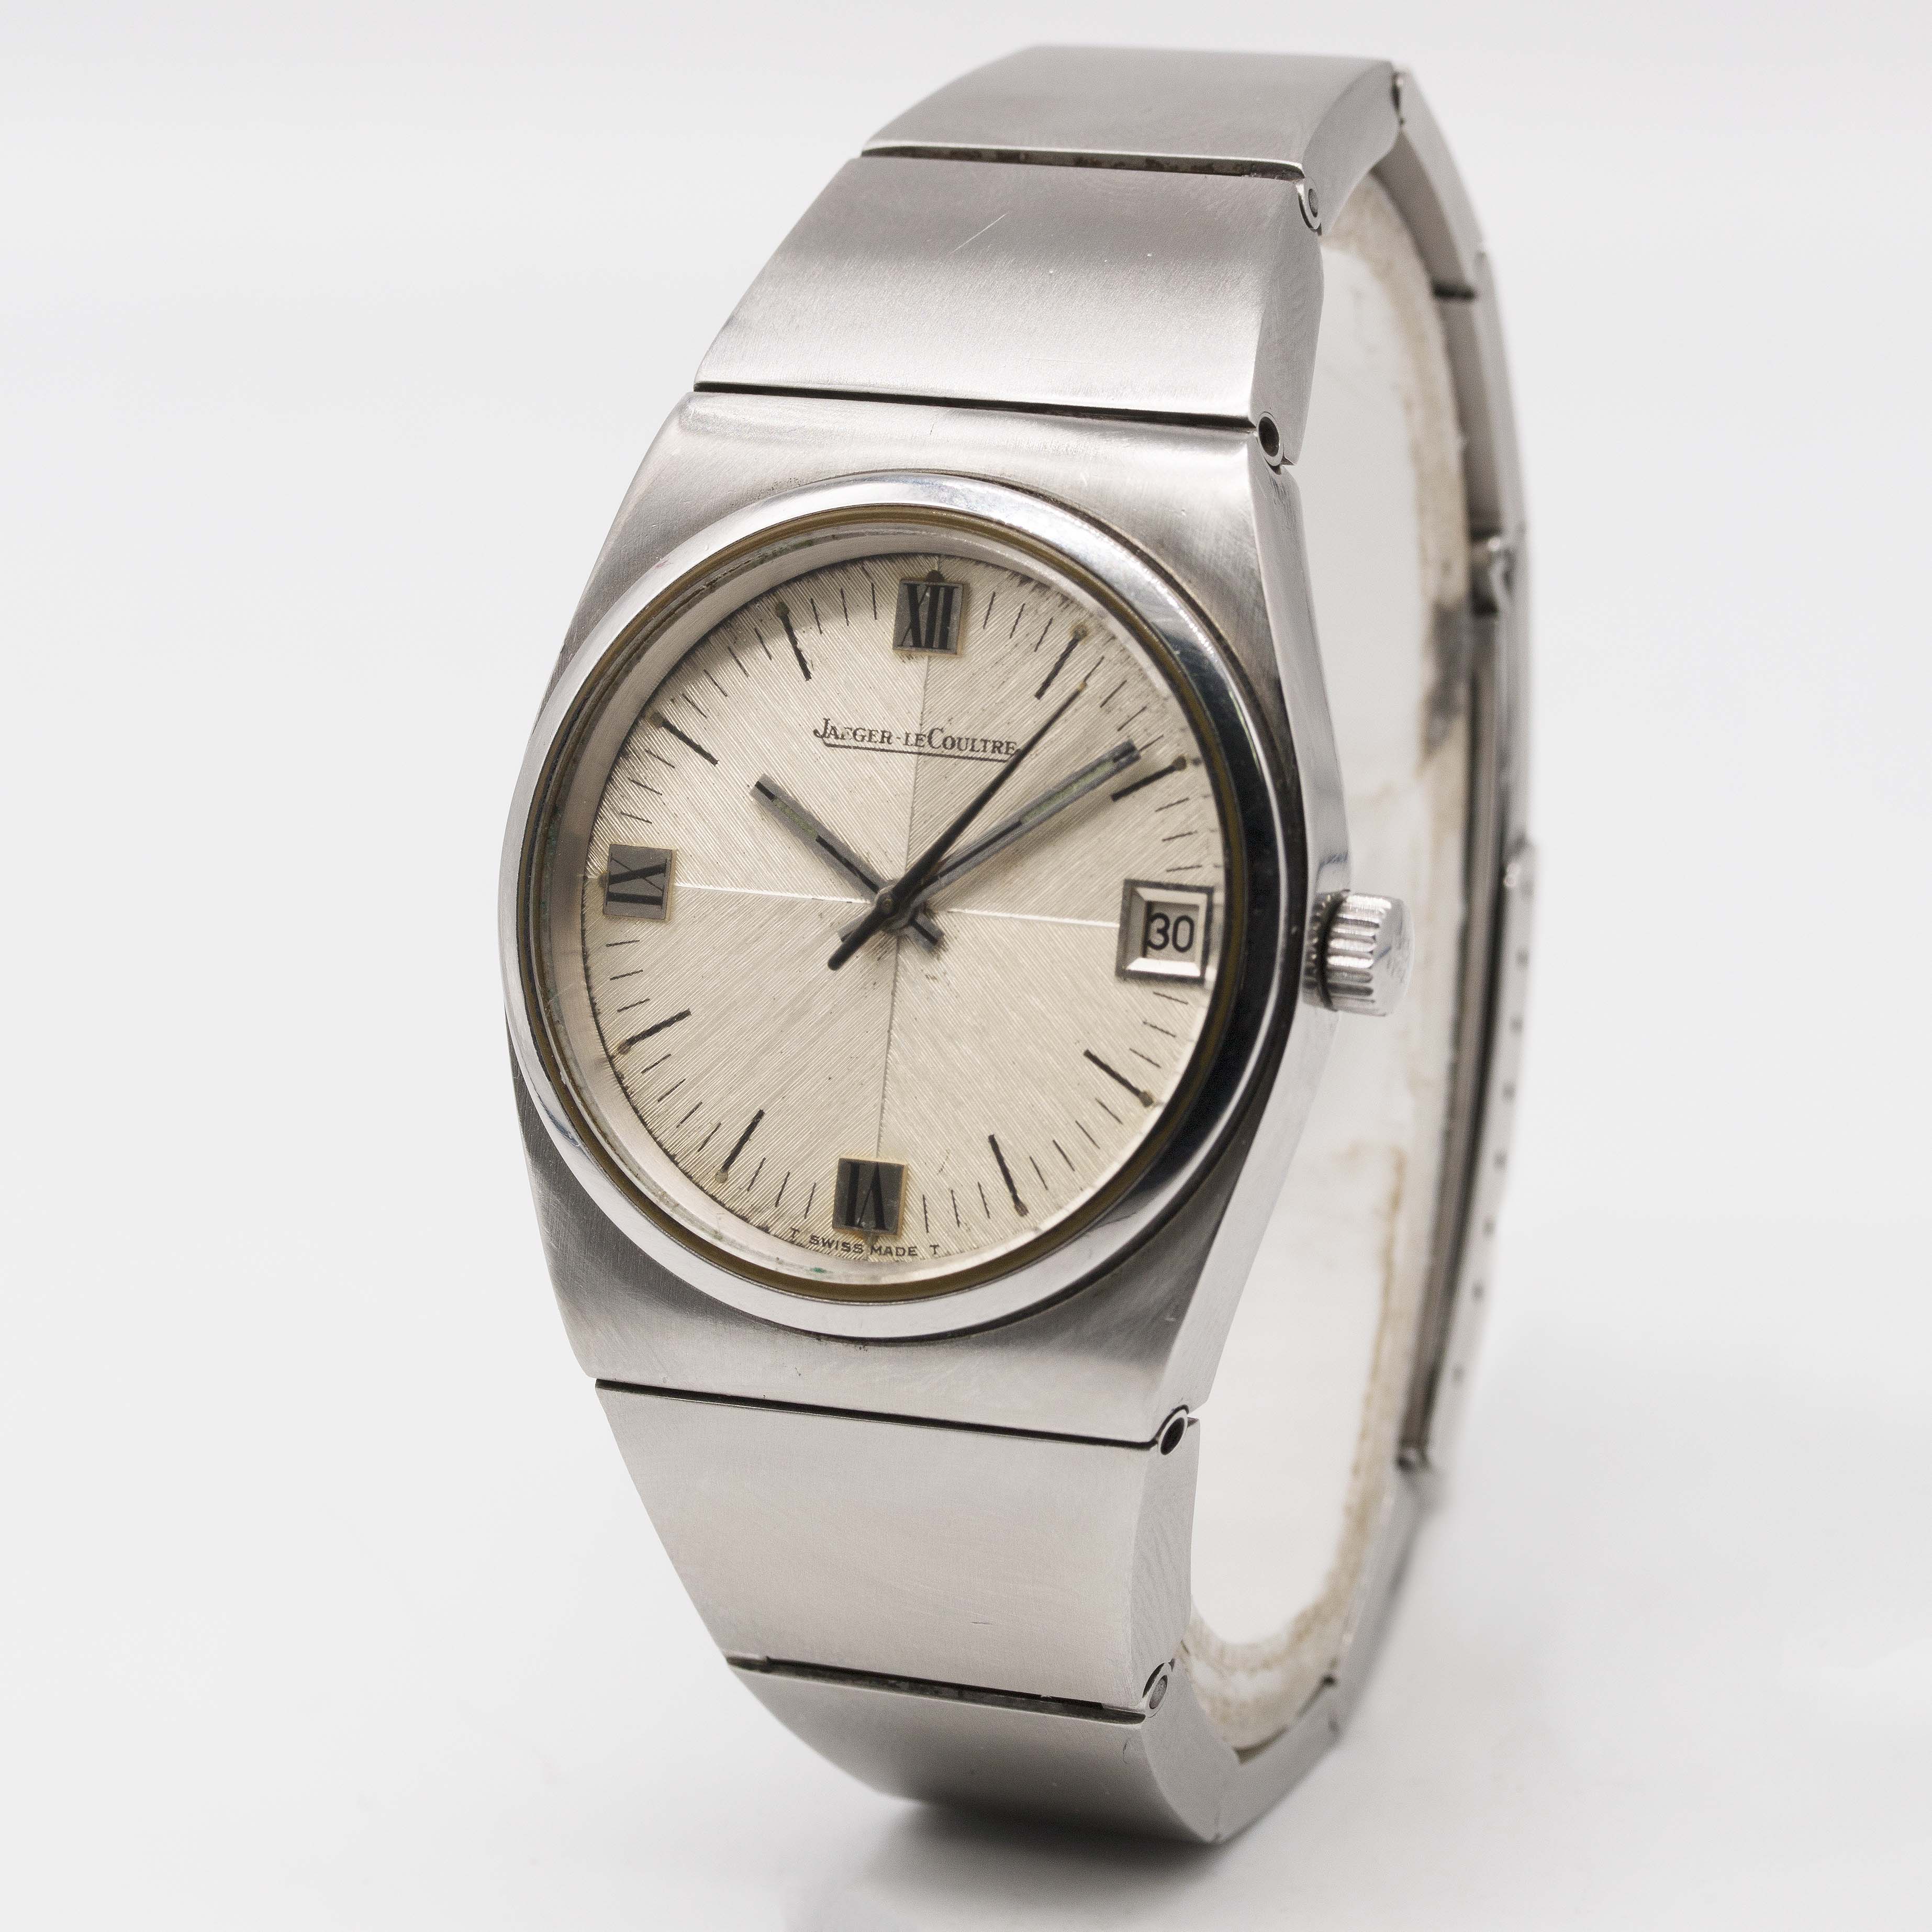 A GENTLEMAN'S STAINLESS STEEL JAEGER LECOULTRE CHRONOMETRE BRACELET WATCH CIRCA 1970s, REF. 24000-42 - Image 2 of 4